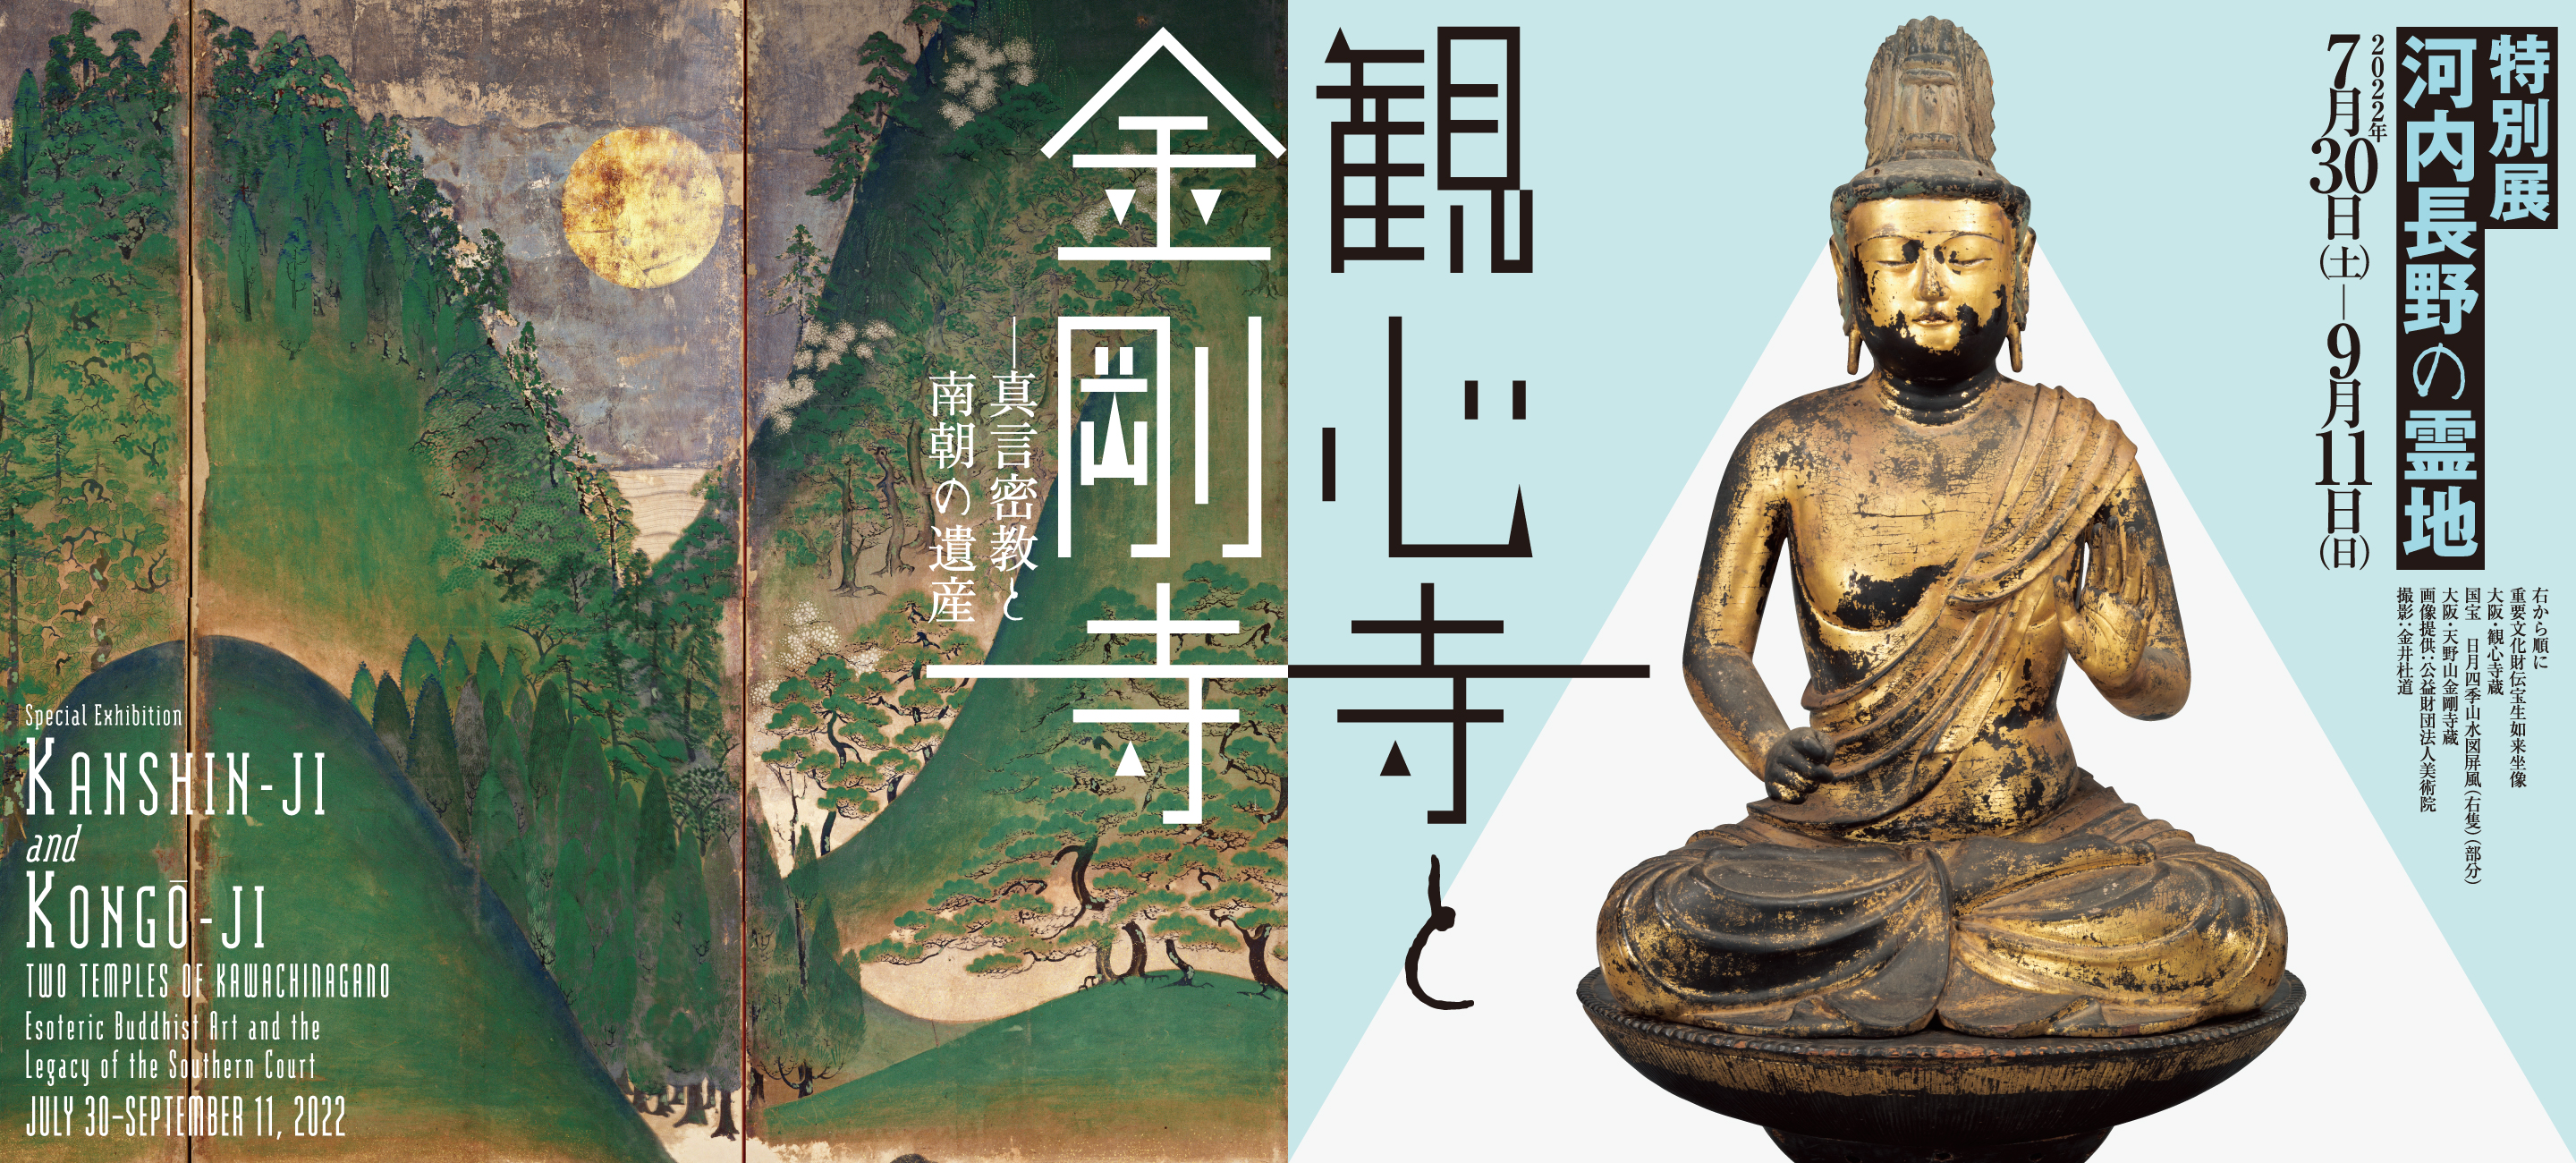 Special Exhibition<br>Kanshin-ji and Kongō-ji, Two Temples of Kawachinagano: Esoteric Buddhist Art and the Legacy of the Southern Court